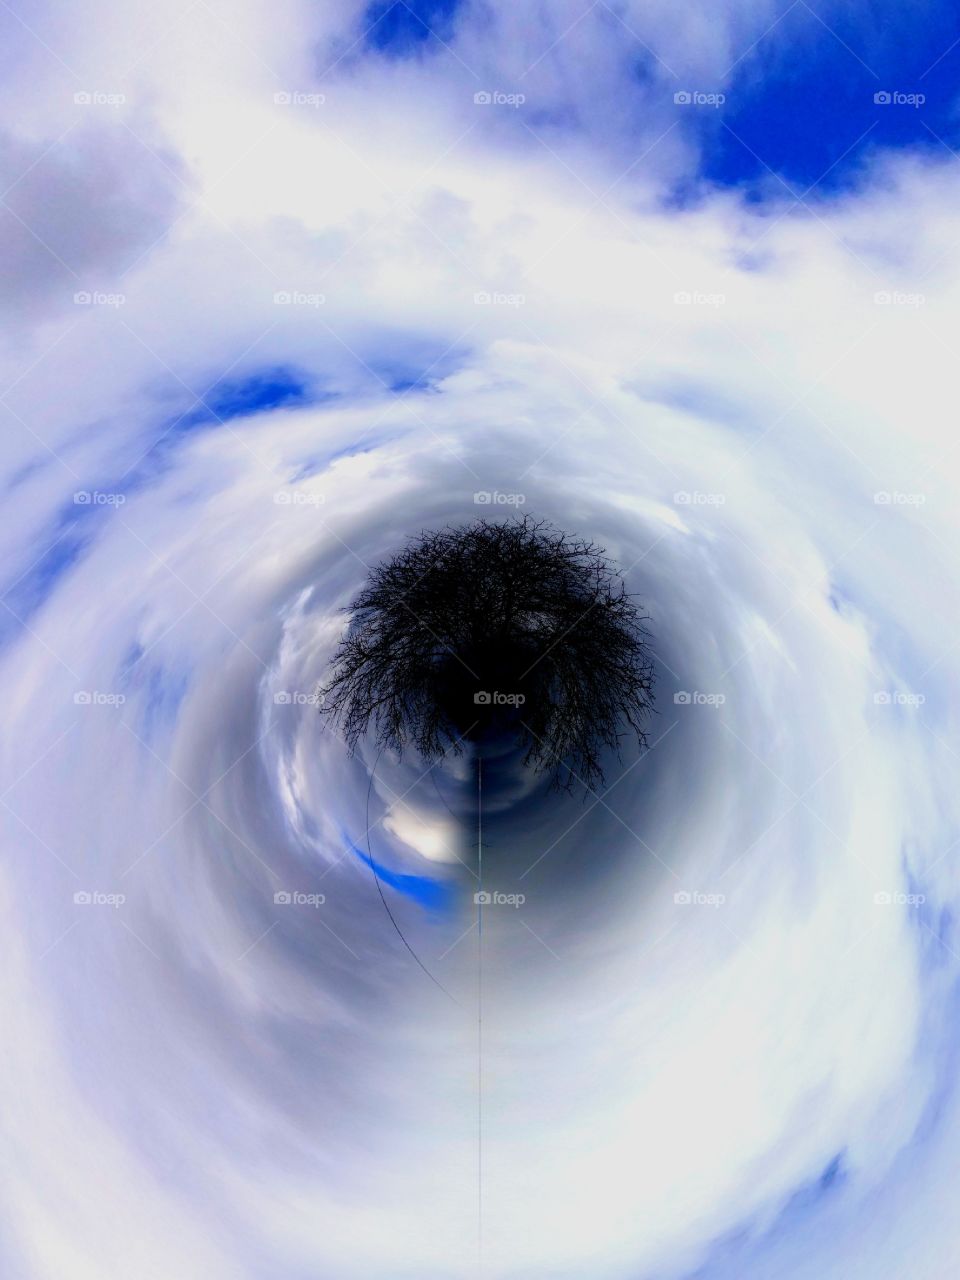 earth in the clouds tiny planet.